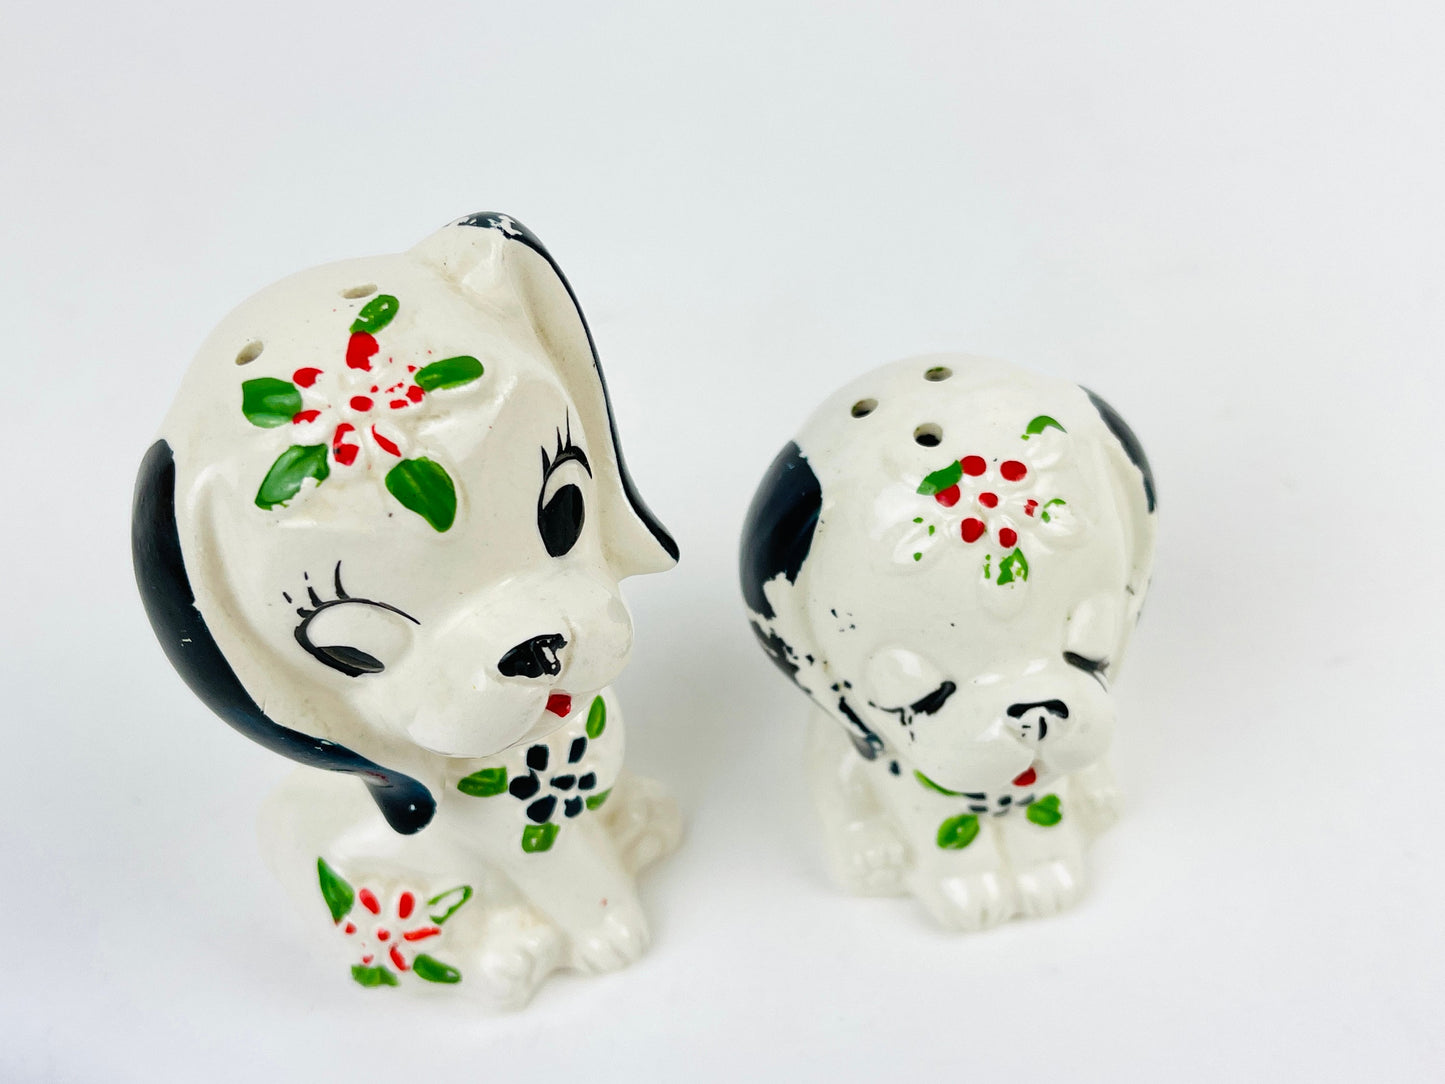 Vintage Salt and Pepper shakers Ceramic Anthropomorphic Puppy Dogs with big eyes and heads. Kitschy mid century decor - Made in Japan